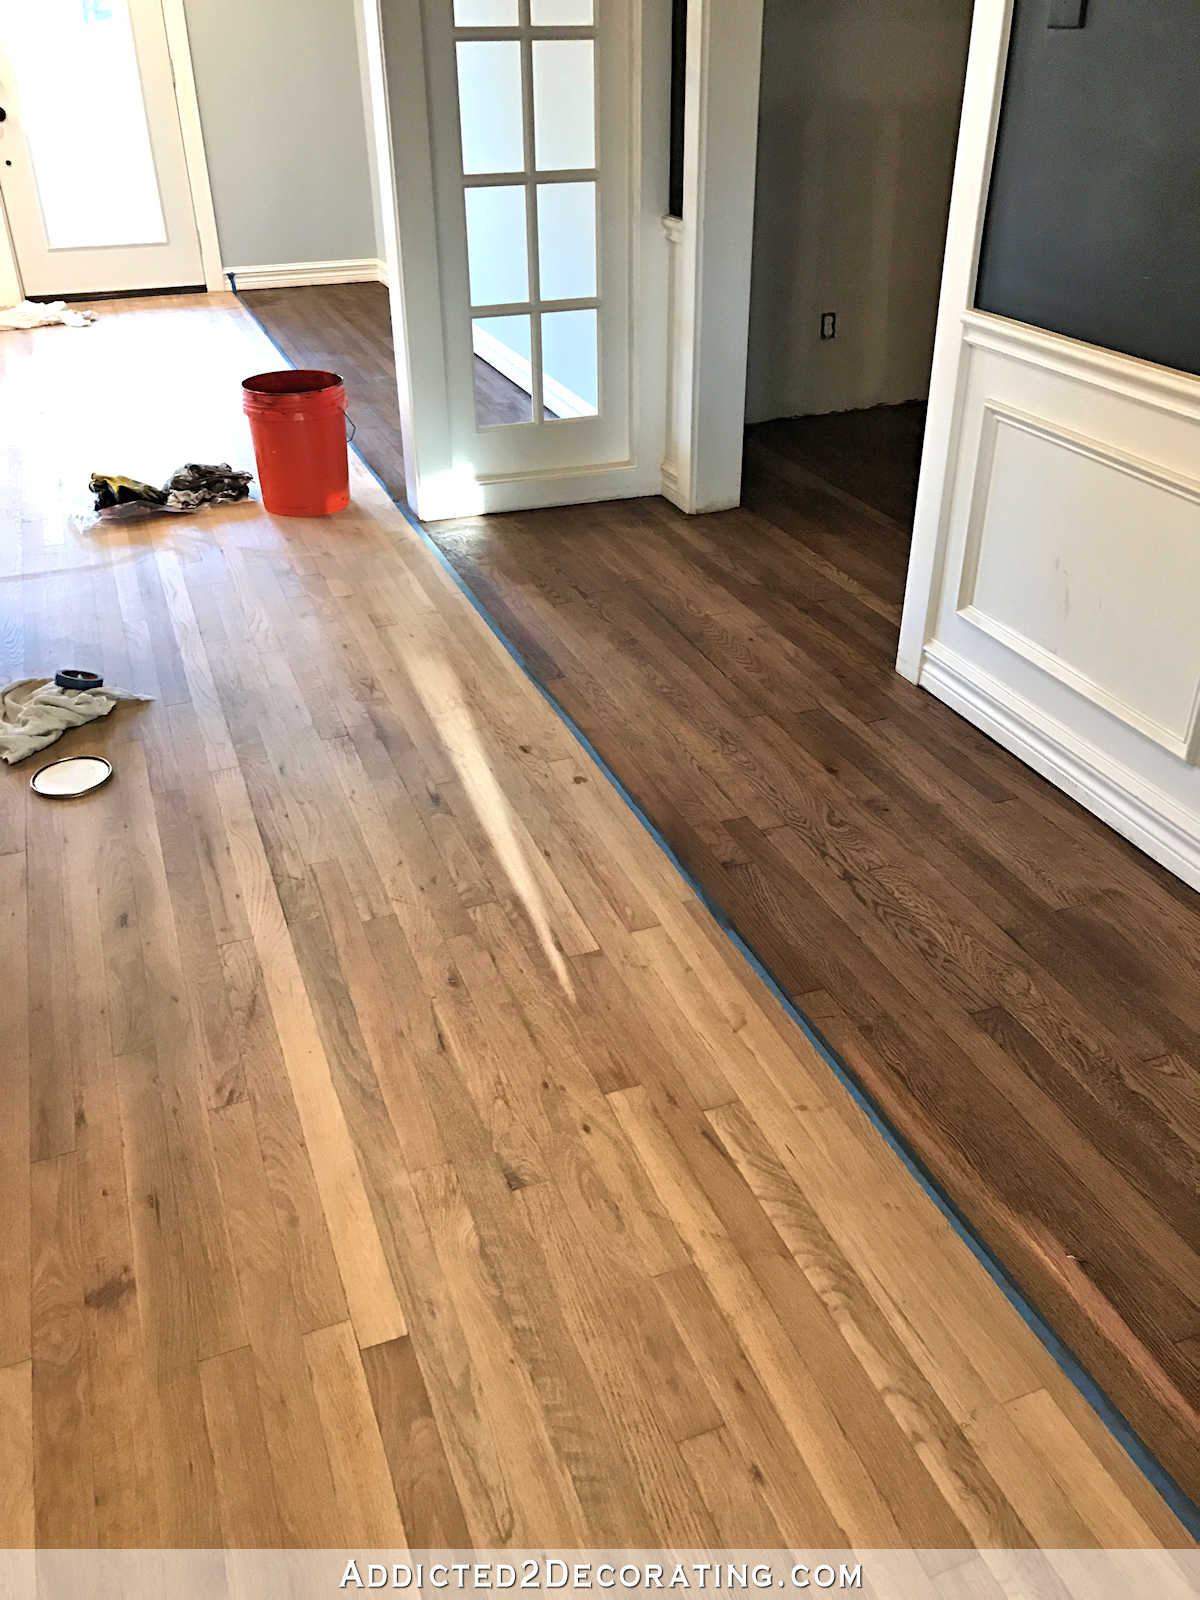 19 Stylish Staining Hardwood Floors How Long to Dry 2024 free download staining hardwood floors how long to dry of adventures in staining my red oak hardwood floors products process intended for staining red oak hardwood floors 6 stain on partial floor in entry